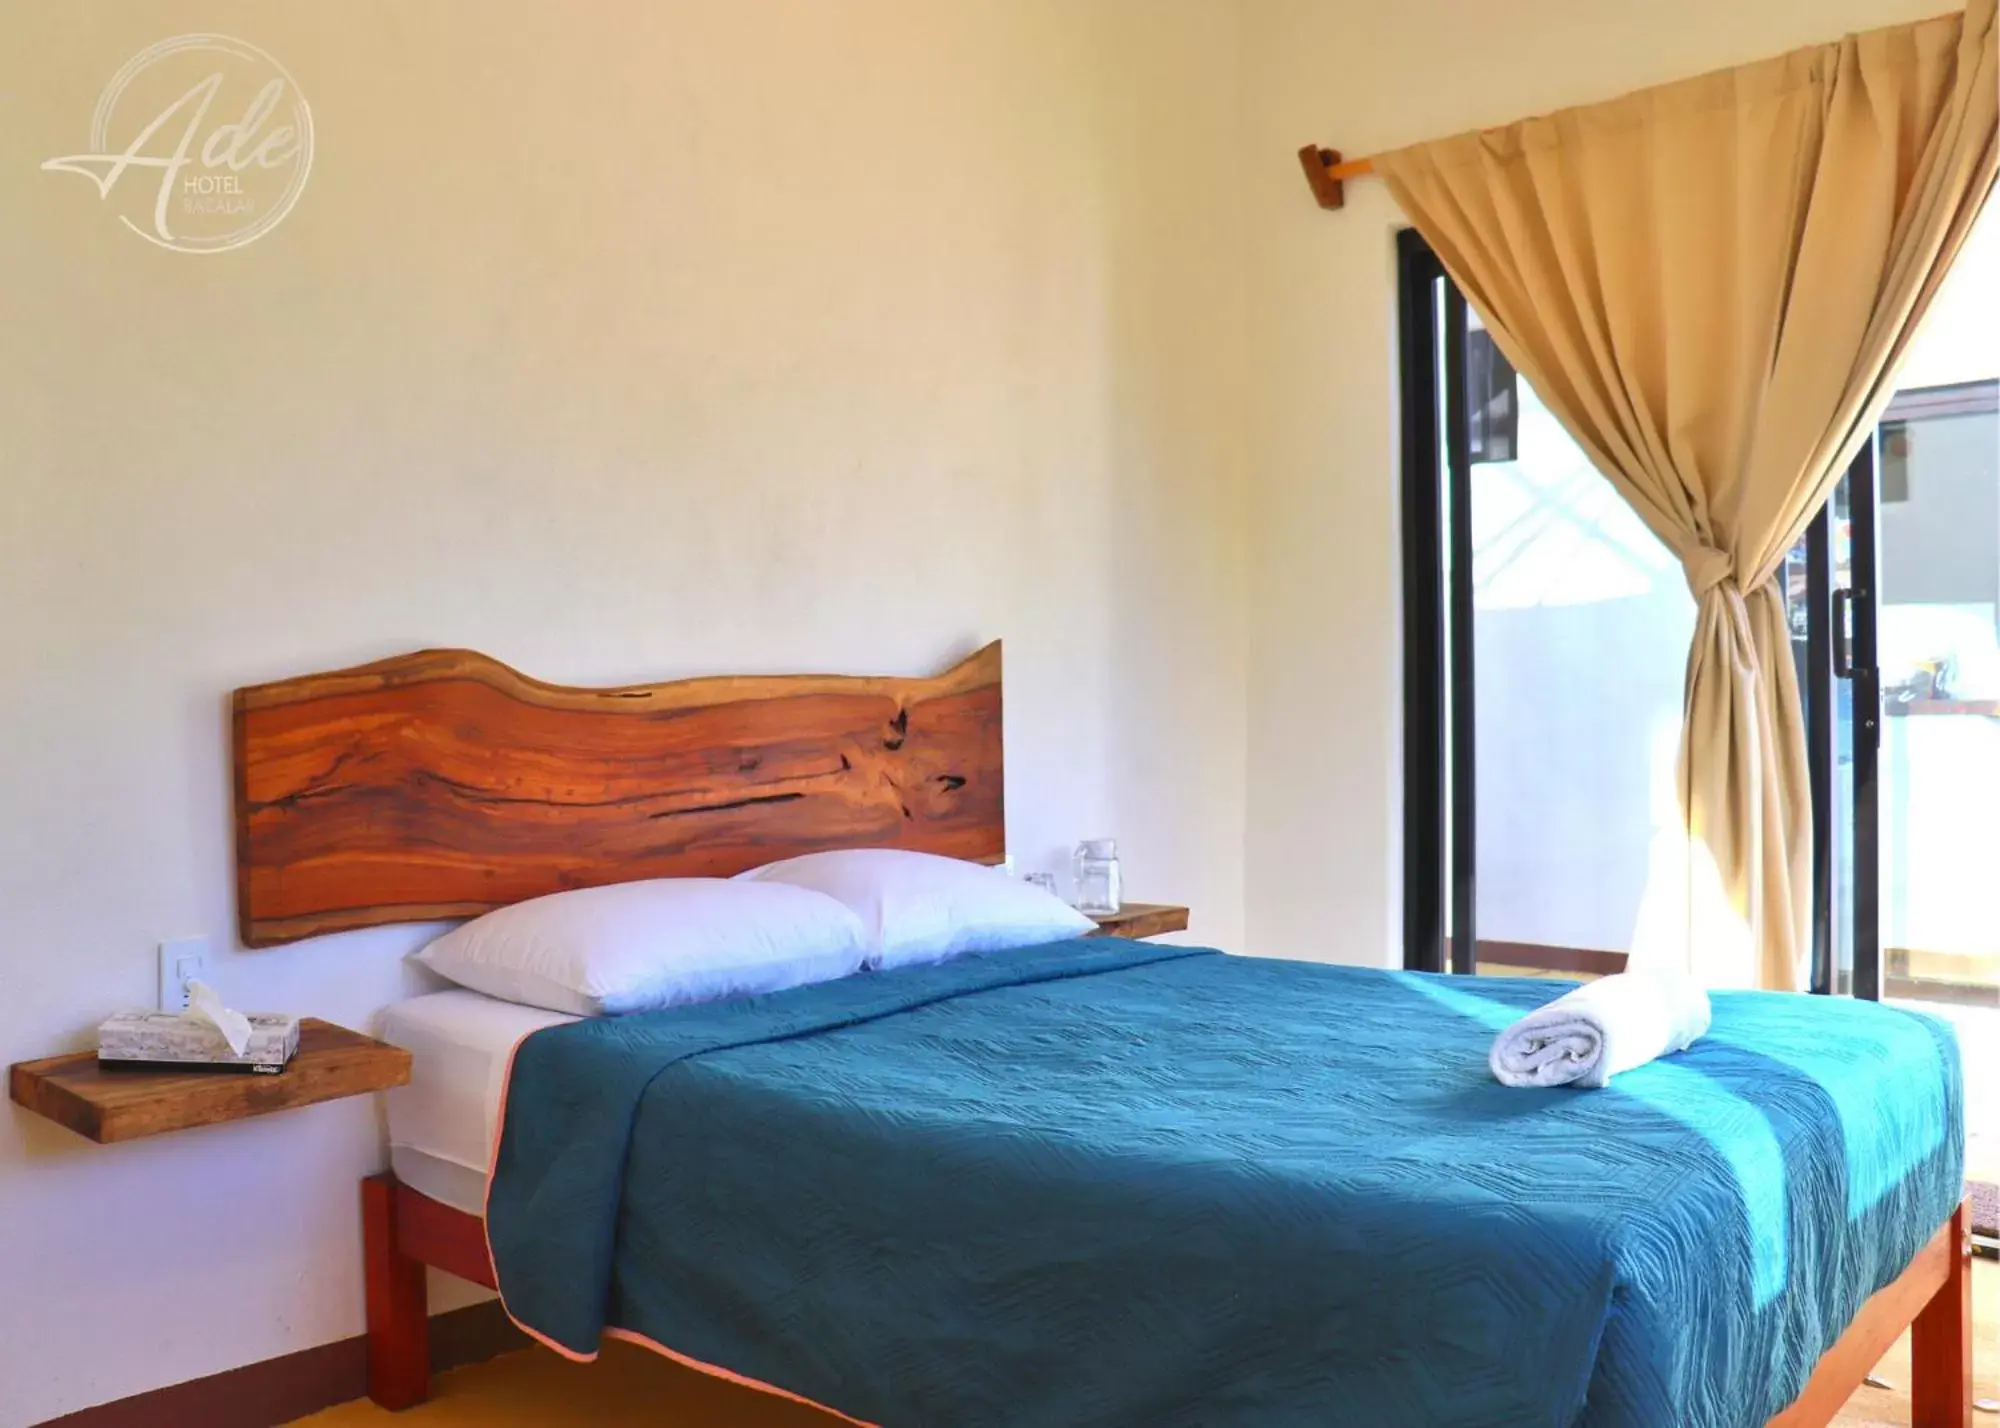 Double Room in Ade Hotel Bacalar